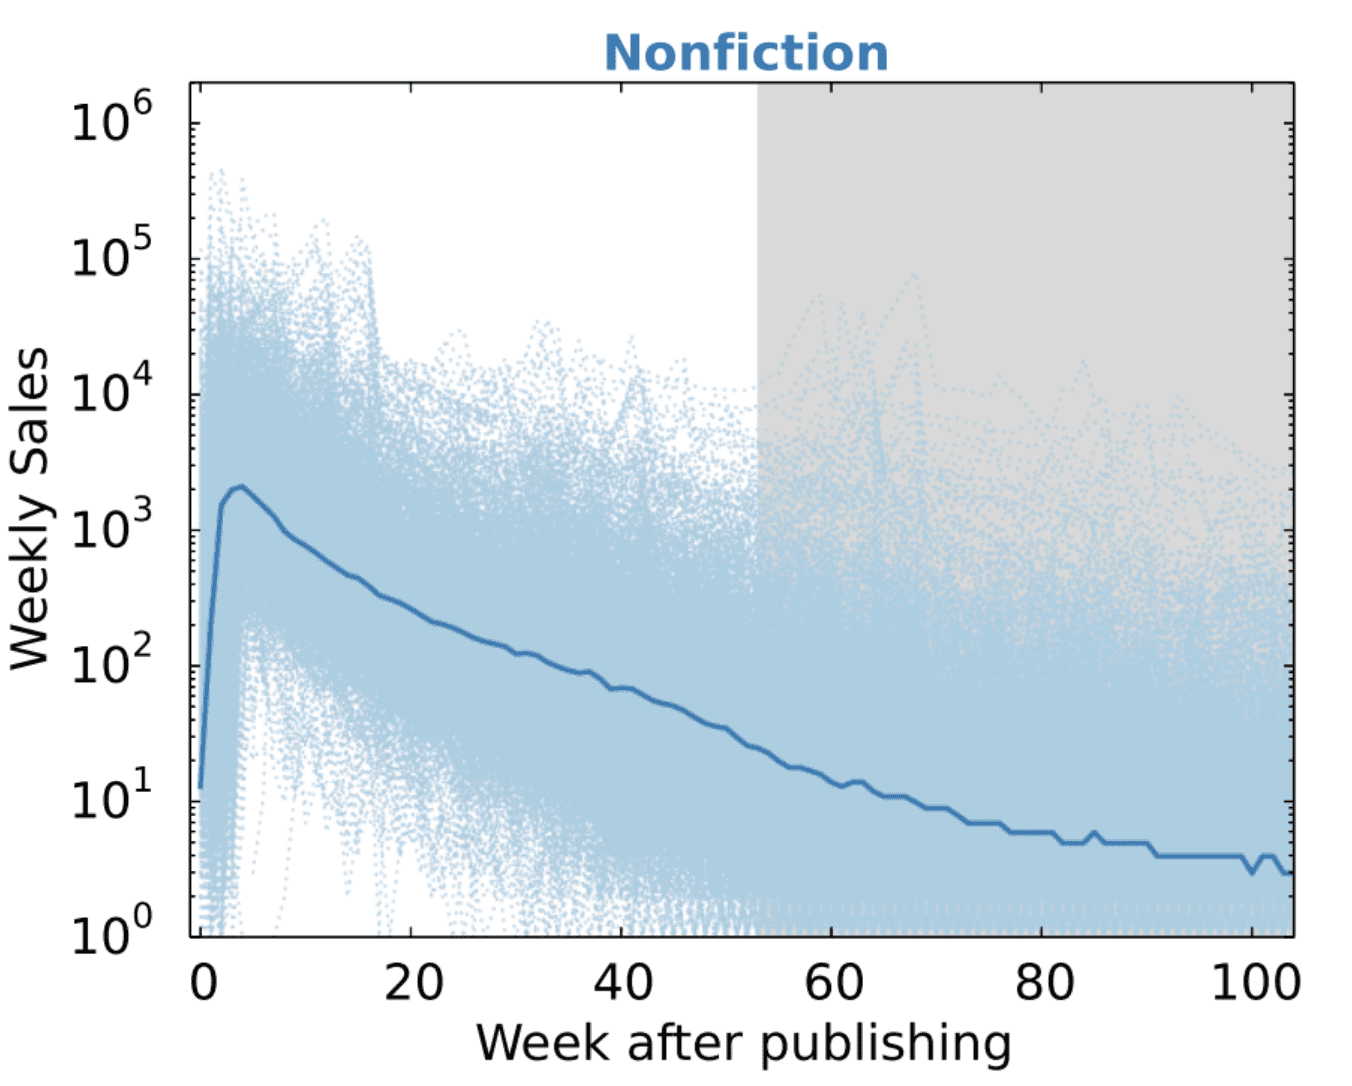 Chart showing weekly sales over time for New York Times nonfiction bestsellers.